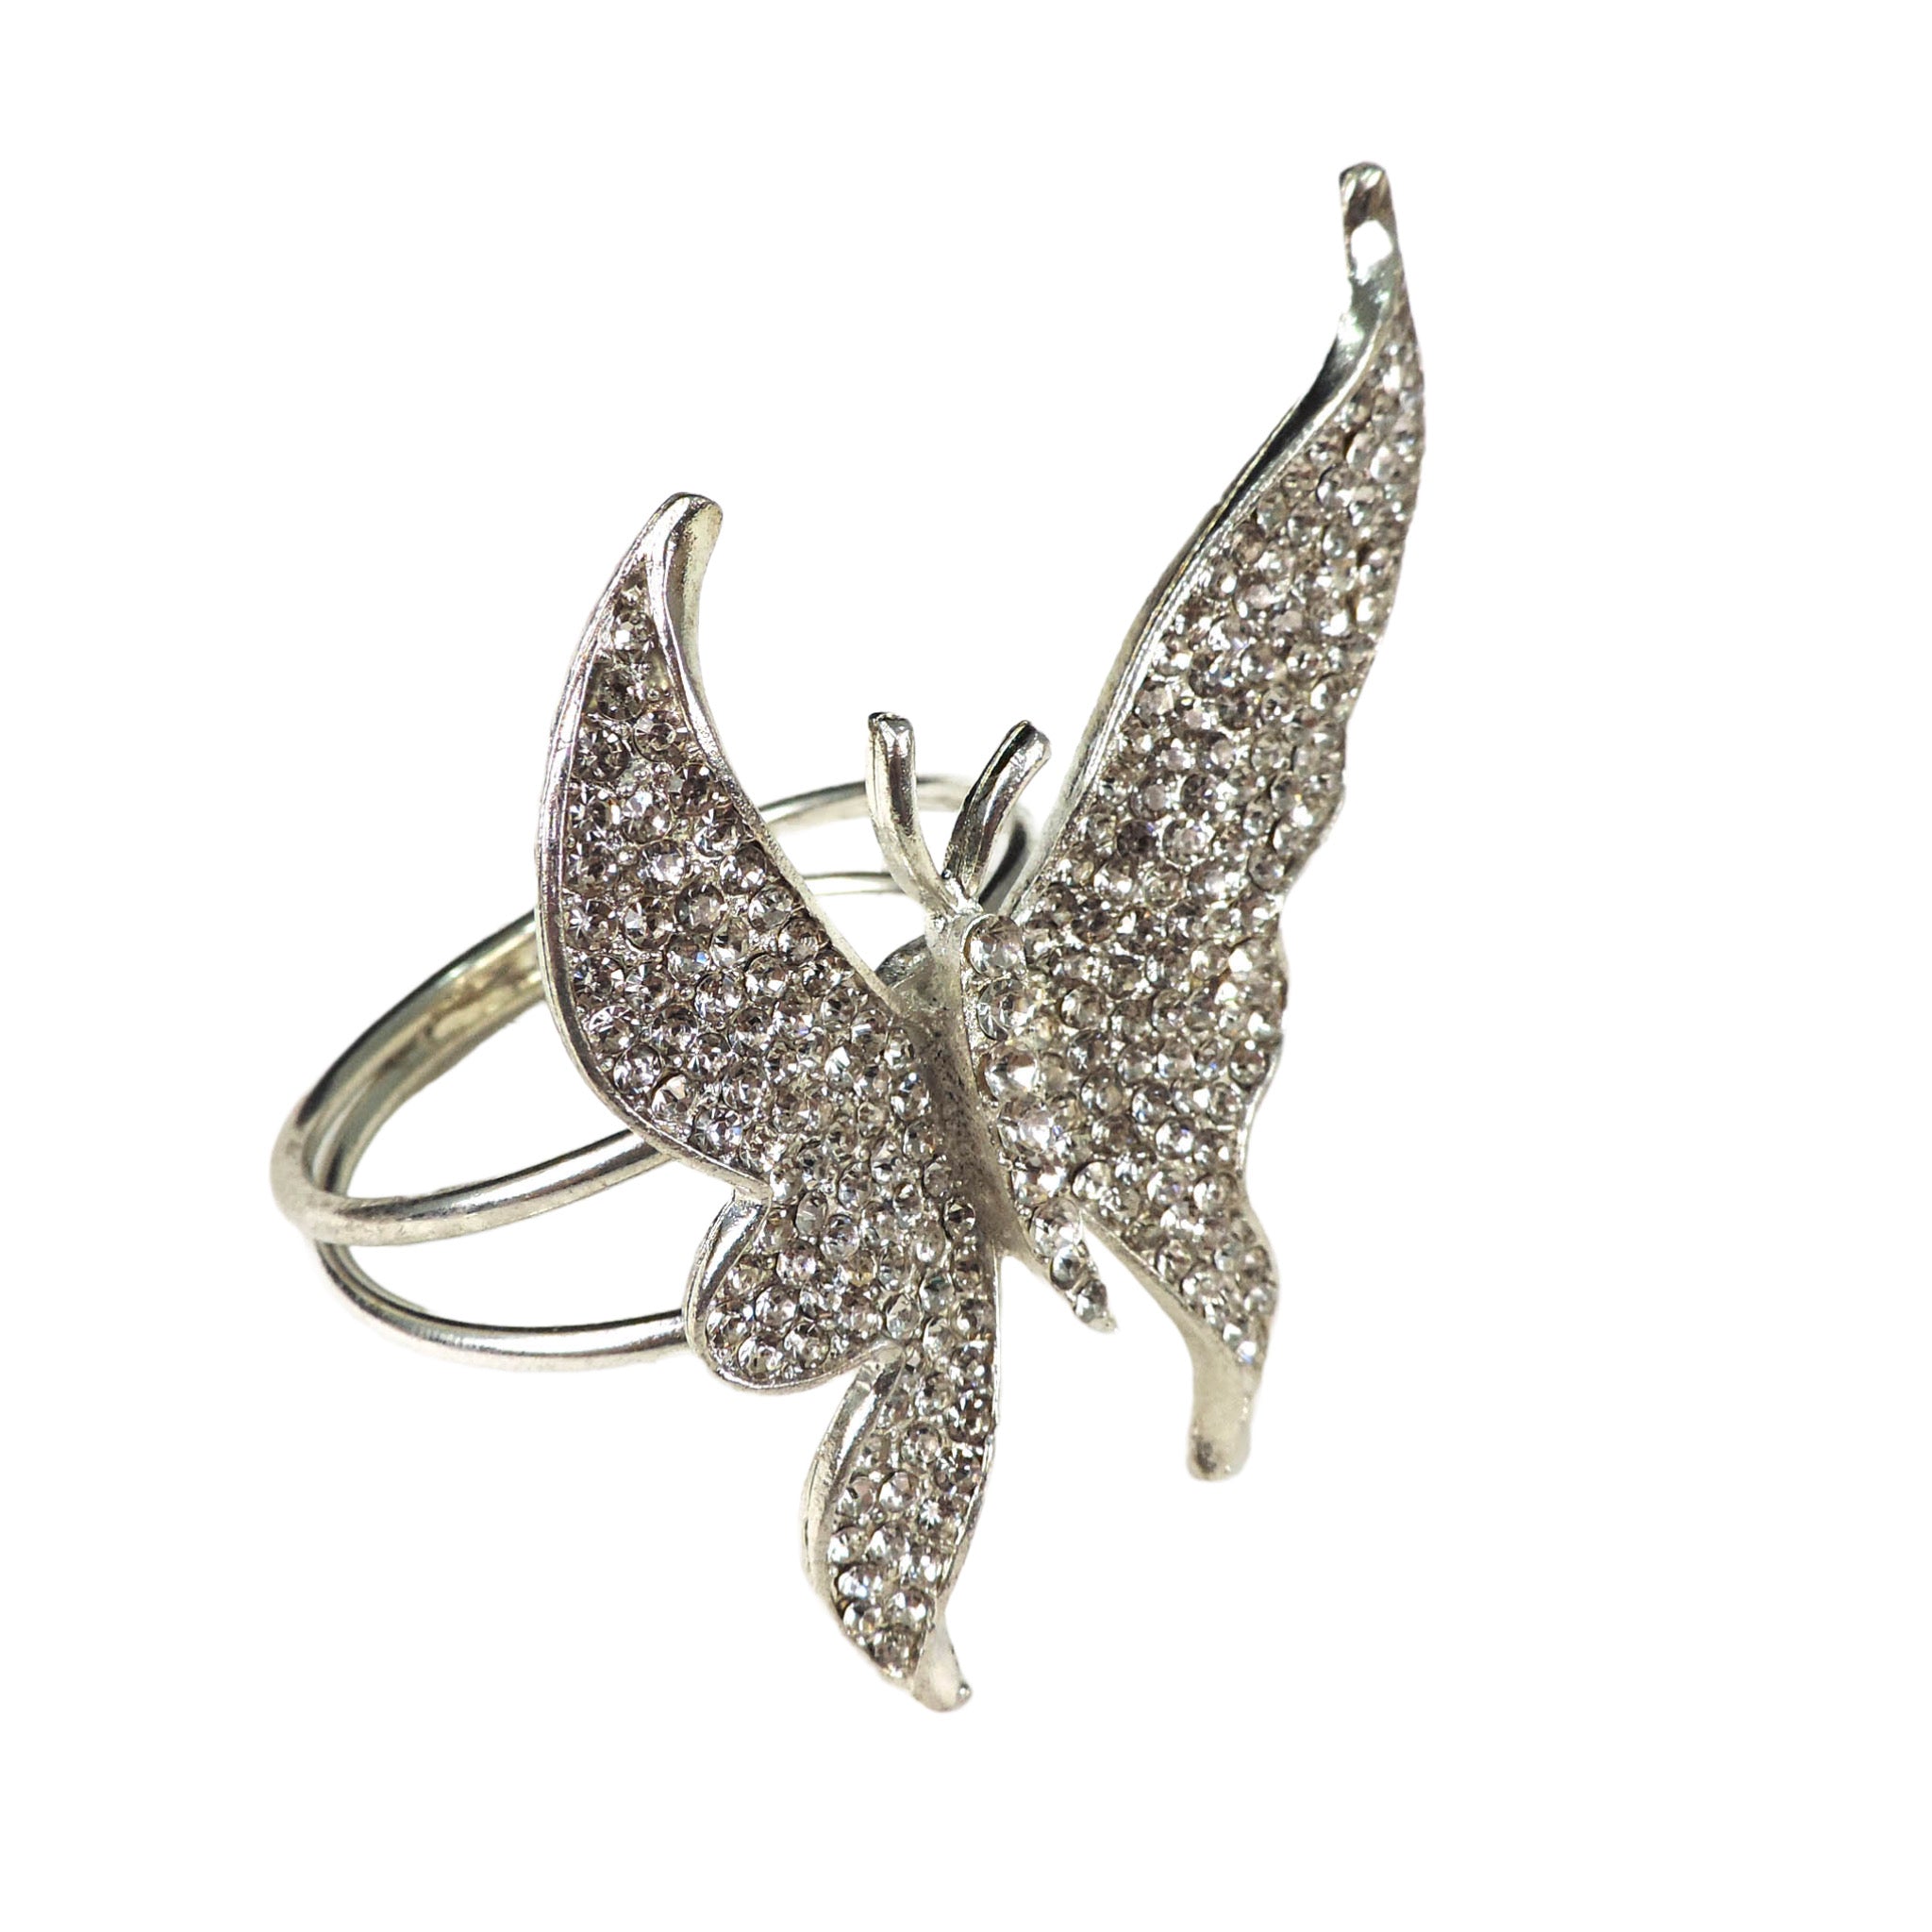 Jeweled Butterfly Napkin Ring in Silver, Set of 4